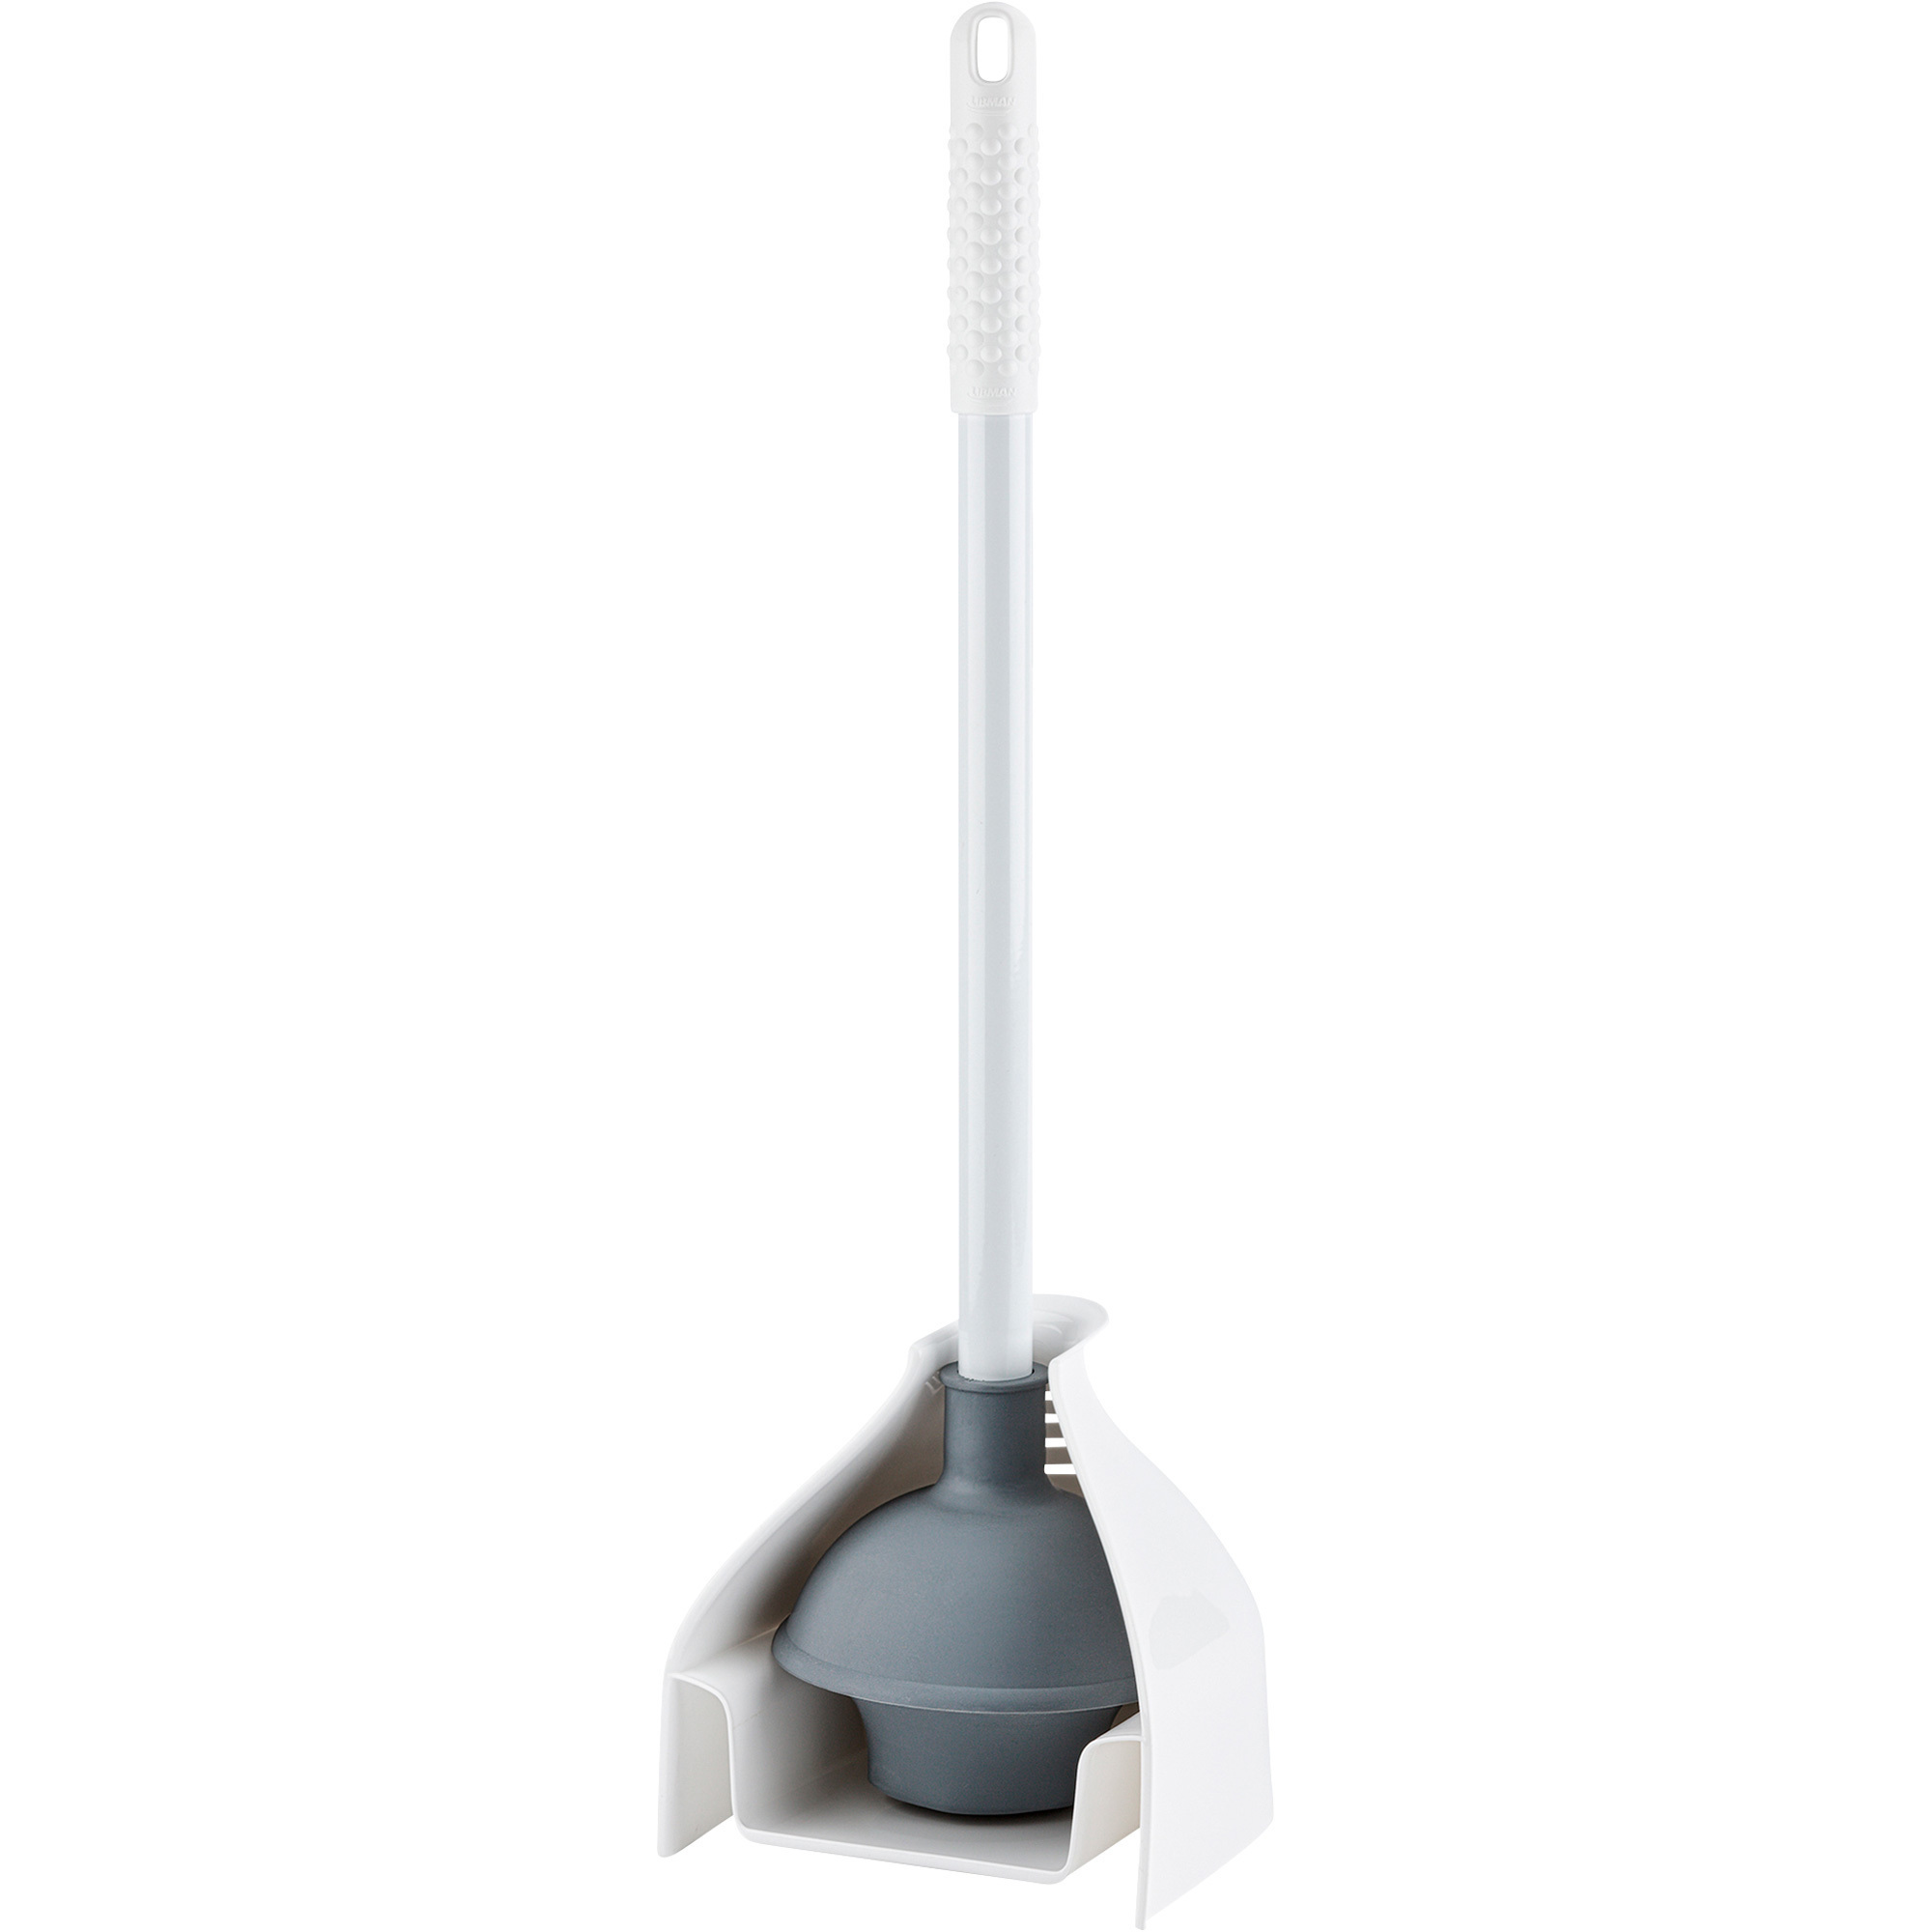 Libman Premium Toilet Plunger and Caddy Set, Model 598